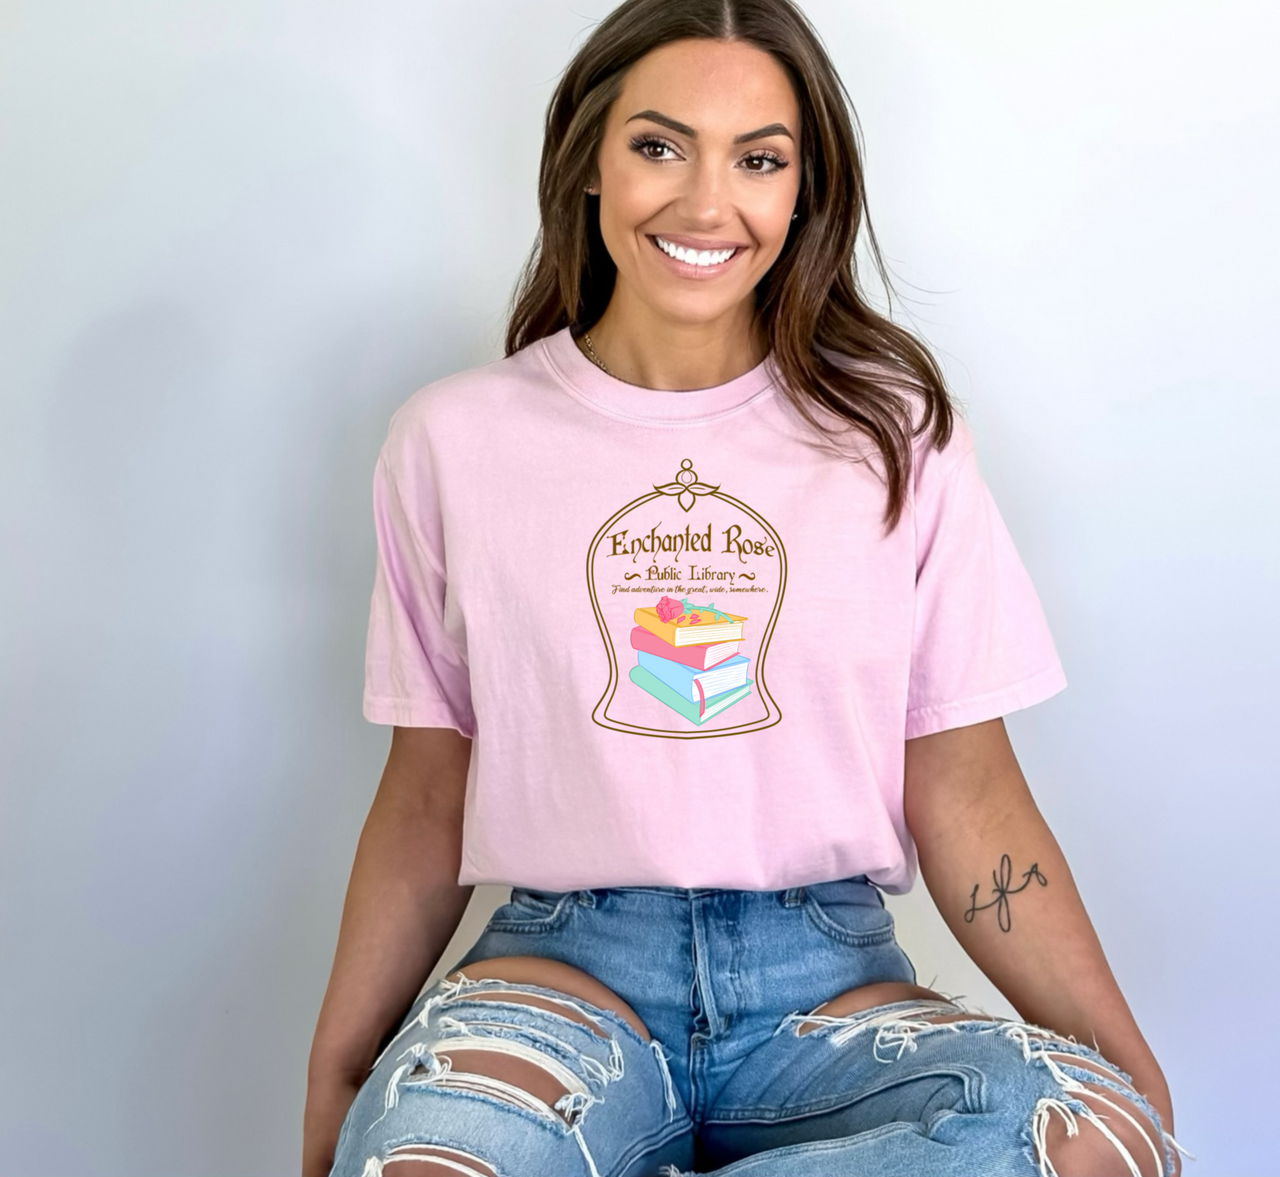 Blossom- Enchanted Rose Public Library Tee